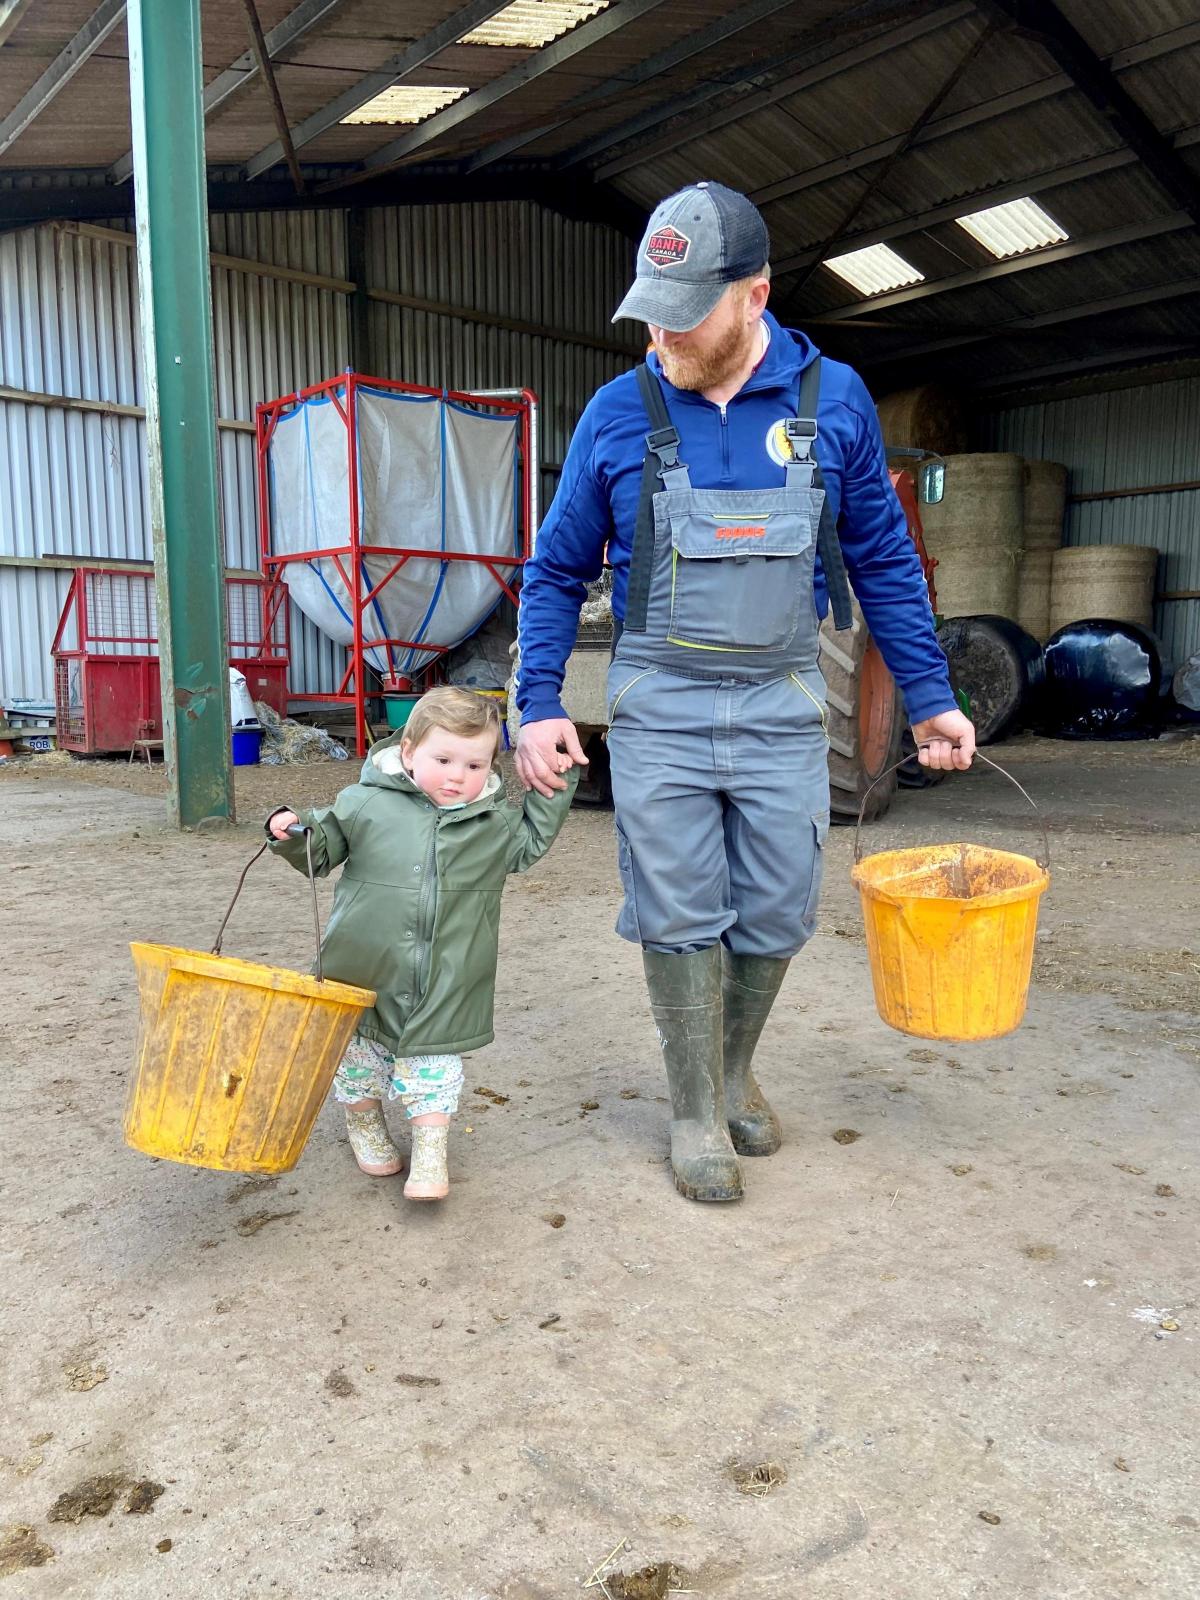 Rachel Hyslop - Time to feed the bull daddy. 16 month old Hannah and daddy Aly Young